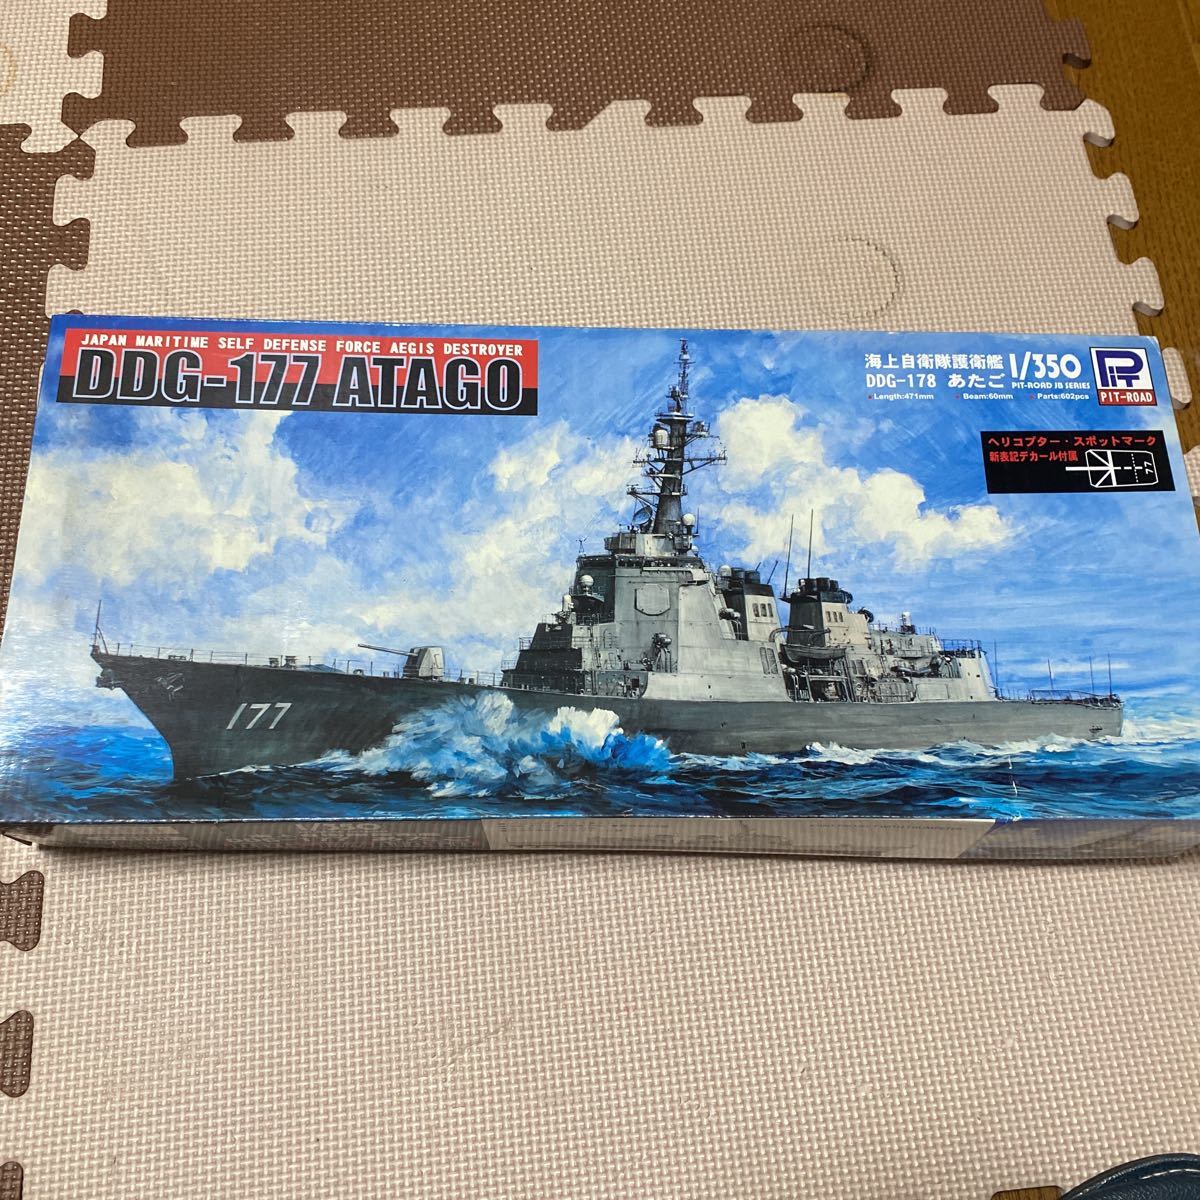  sea on self ..i-jis...DDG-177...( new arrivals . sign decal attaching ) (1/350 scale Skywave JB18)